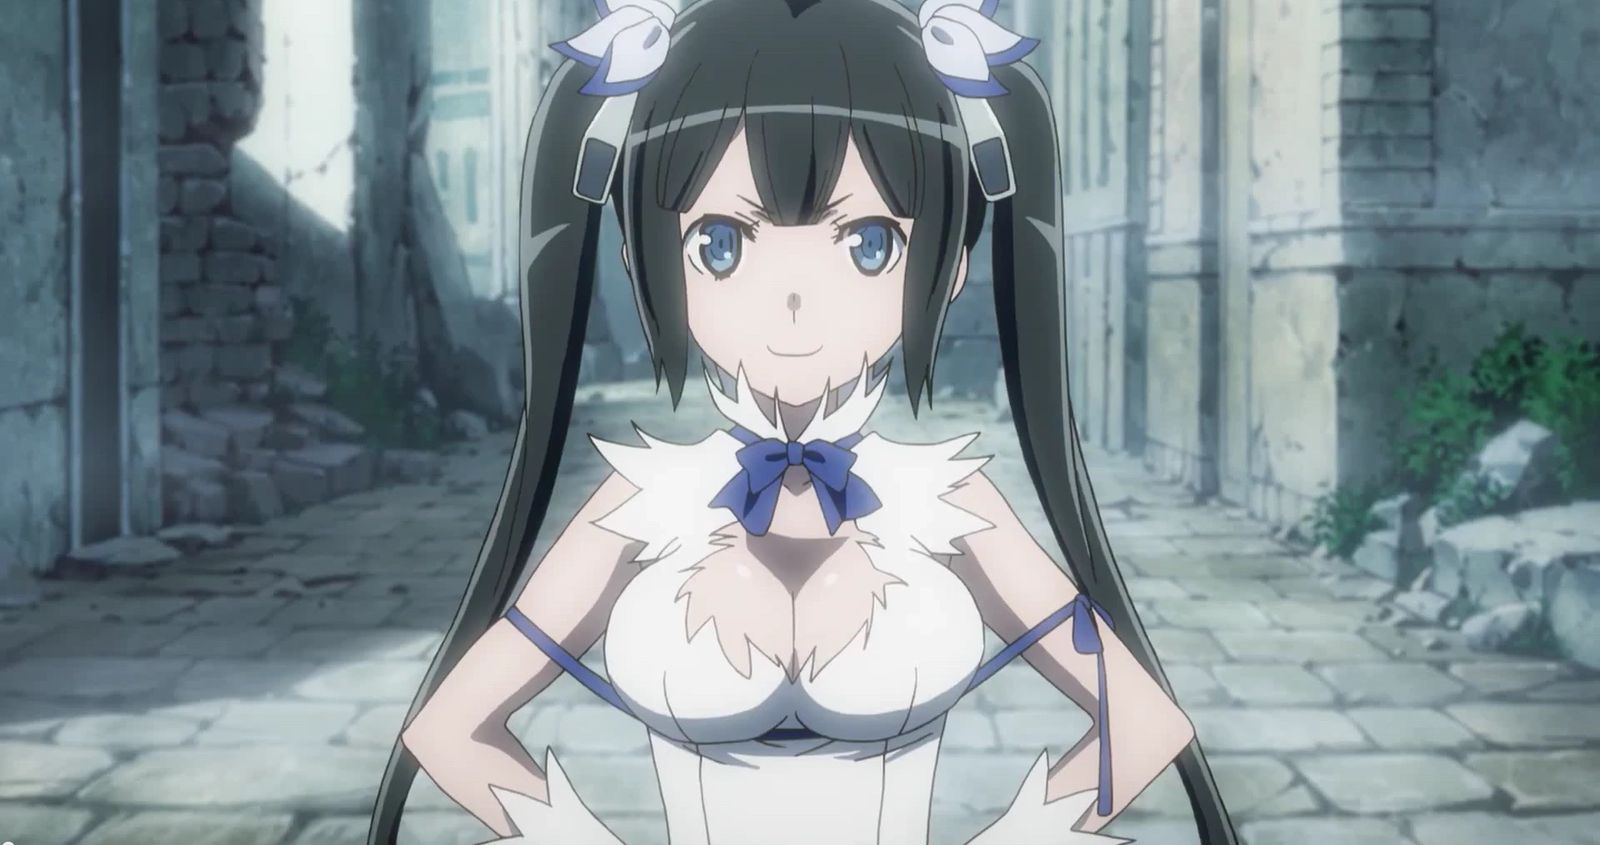 Where to Watch DanMachi: Is It Wrong to Try to Pick Up Girls in a Dungeon?